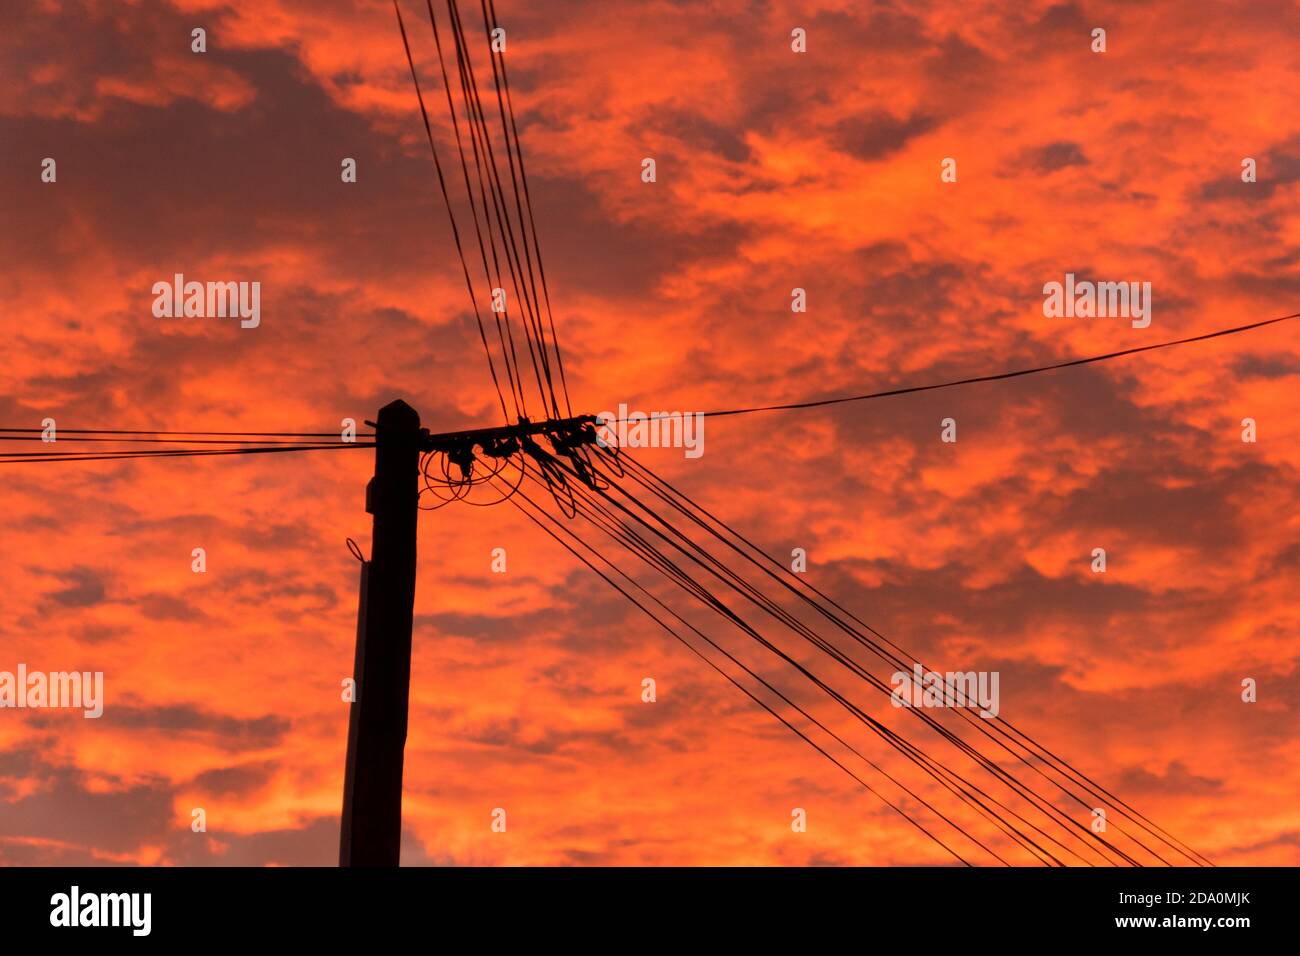 An electrical line and a power pole Stock Photo